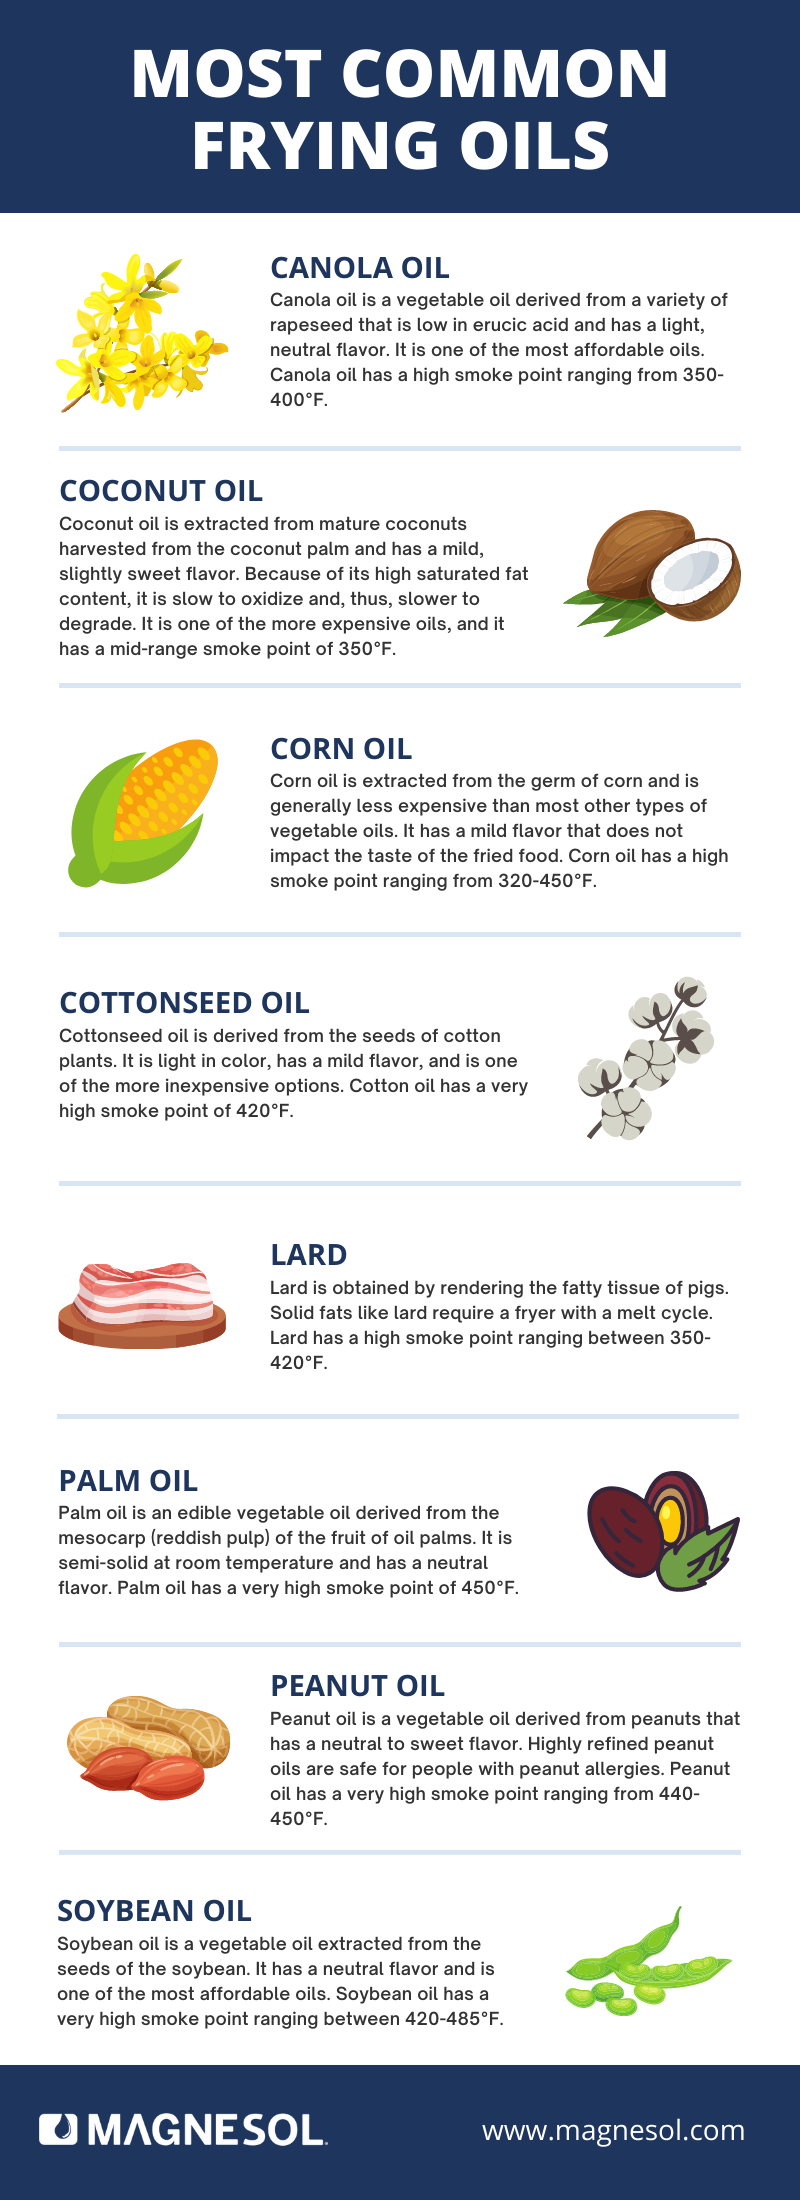 Most Common Frying Oils